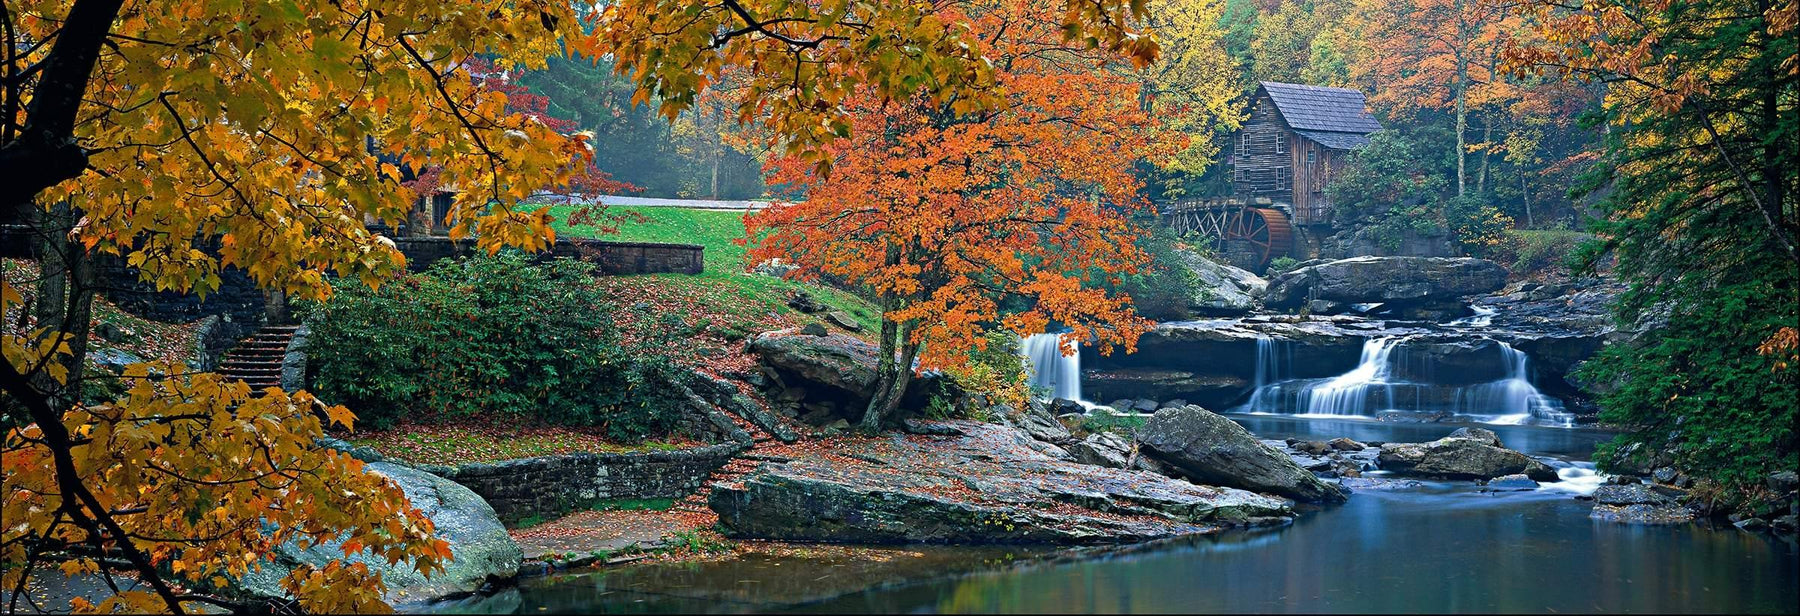 Autumn branches hanging over the rivers edge in front of  Glade Creek Grist Mill in the Appalachian Mountains